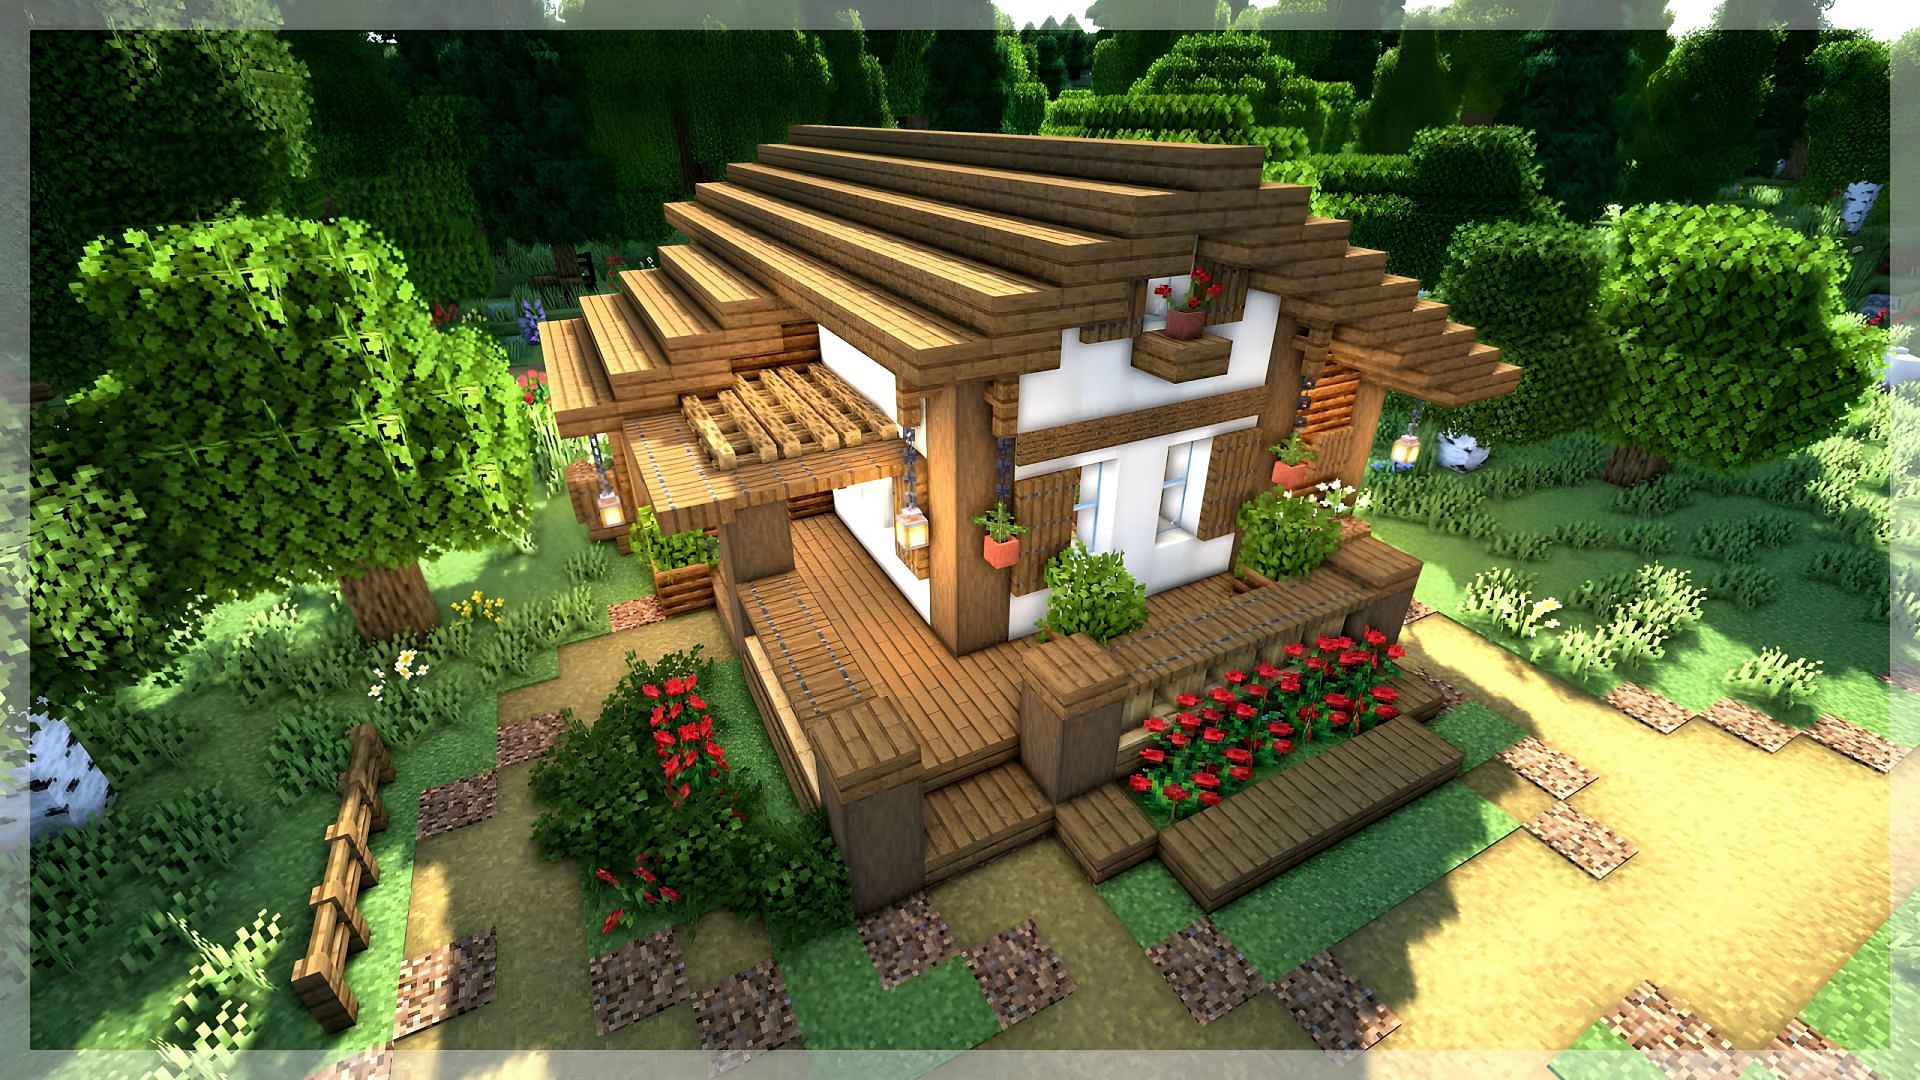 Cottages are very cute and cozy (Image via Youtube/BlueNerd Minecraft)